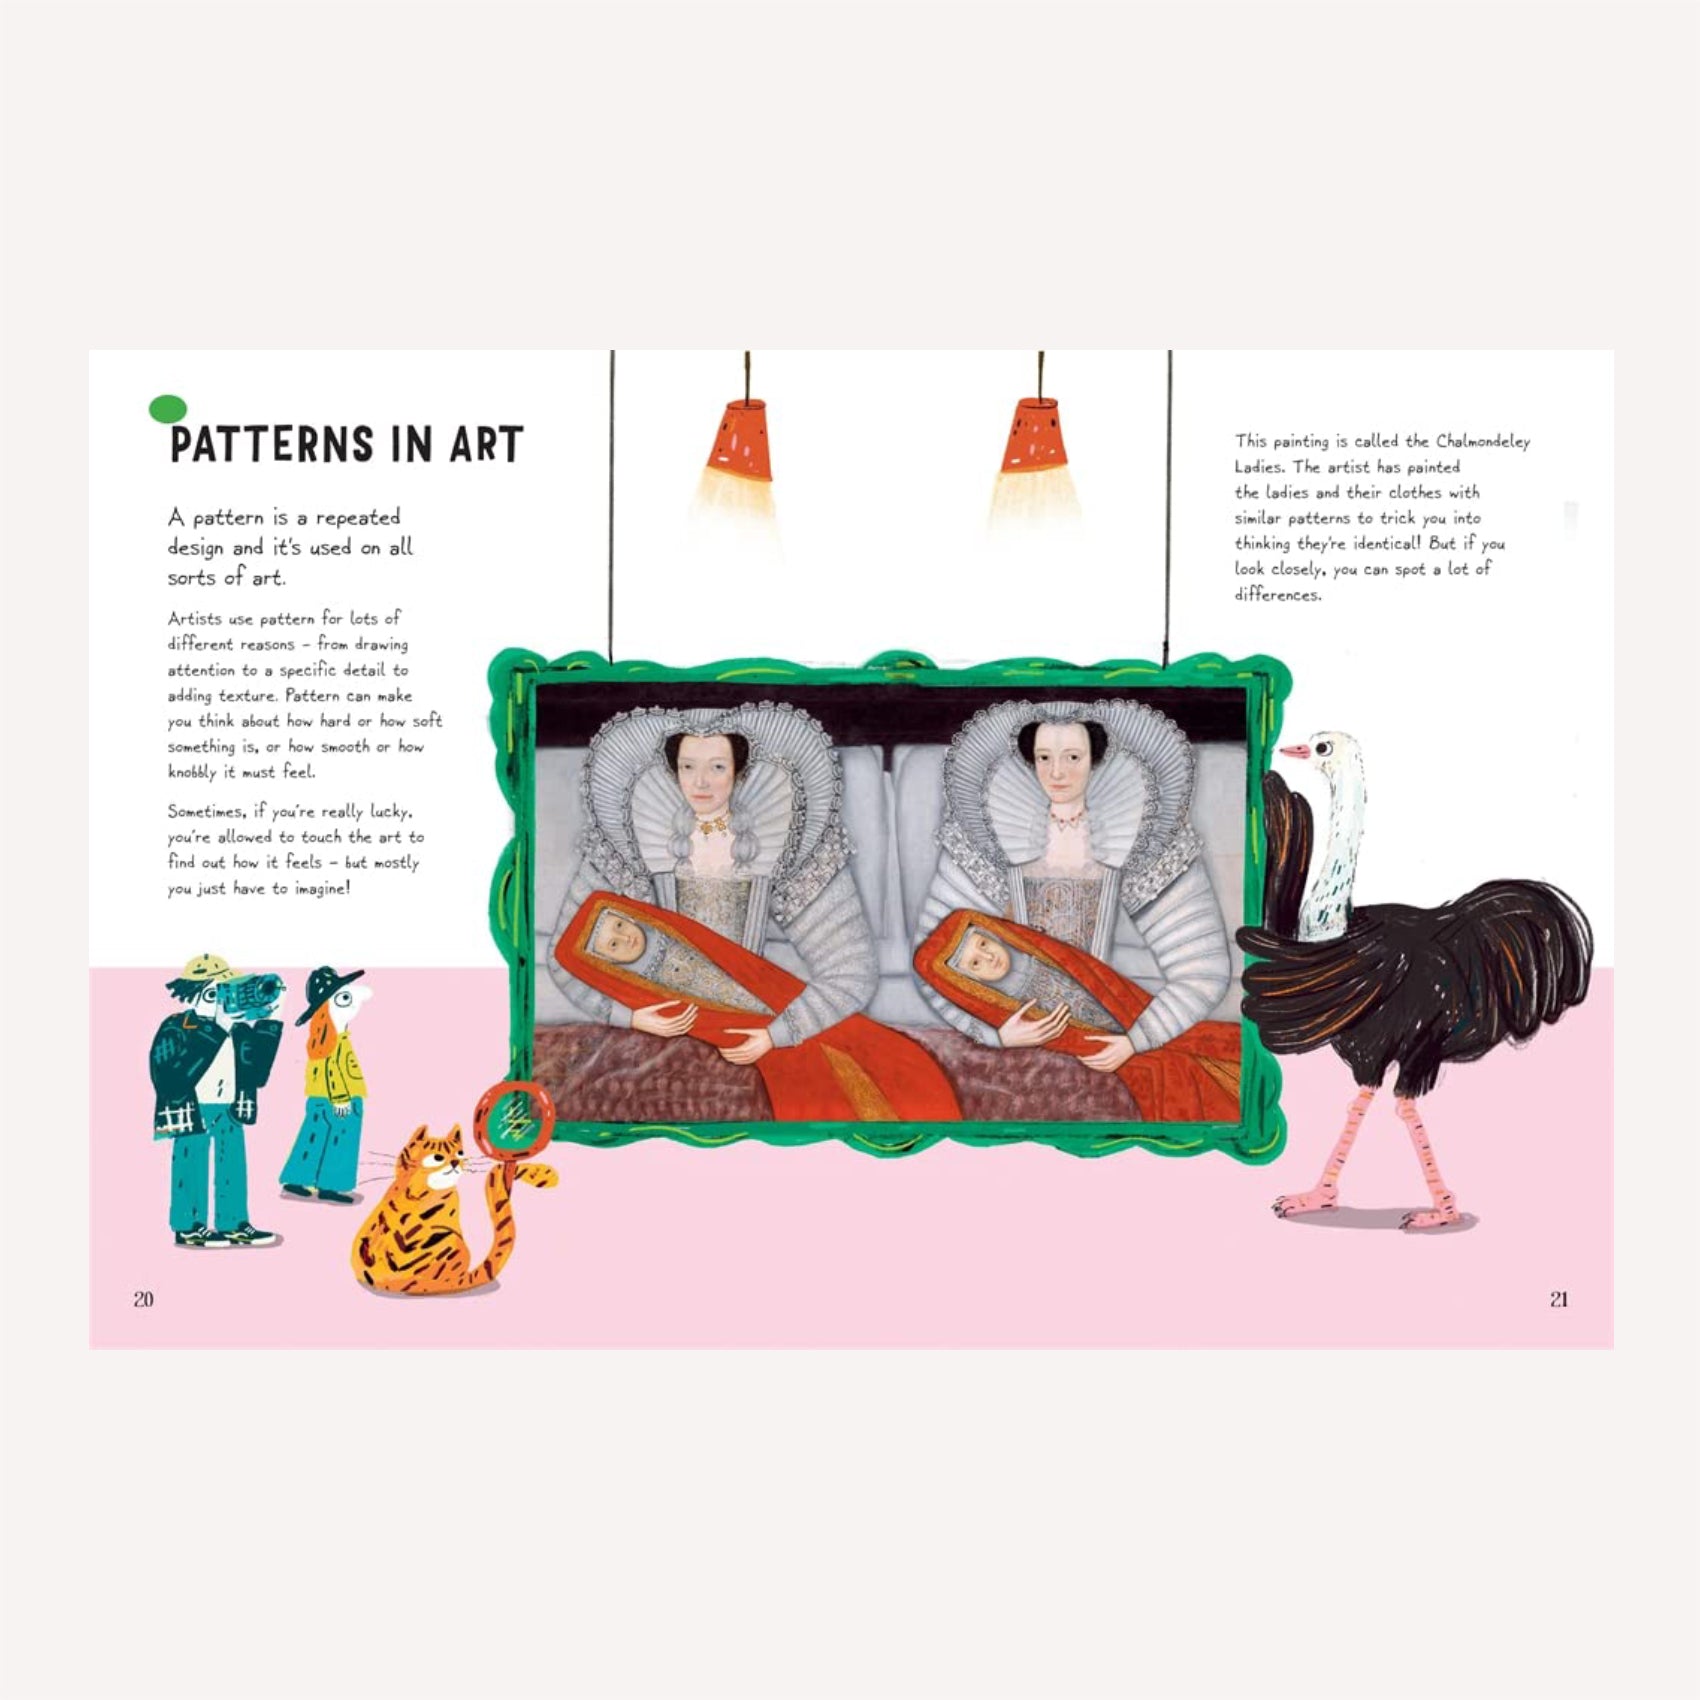 Inside “Art is Everywhere” by Ellie Chan and Liv Bargman. This double page spread gives an introduction to patterns in art with bright, colourful illustrations, accessible for young readers. 